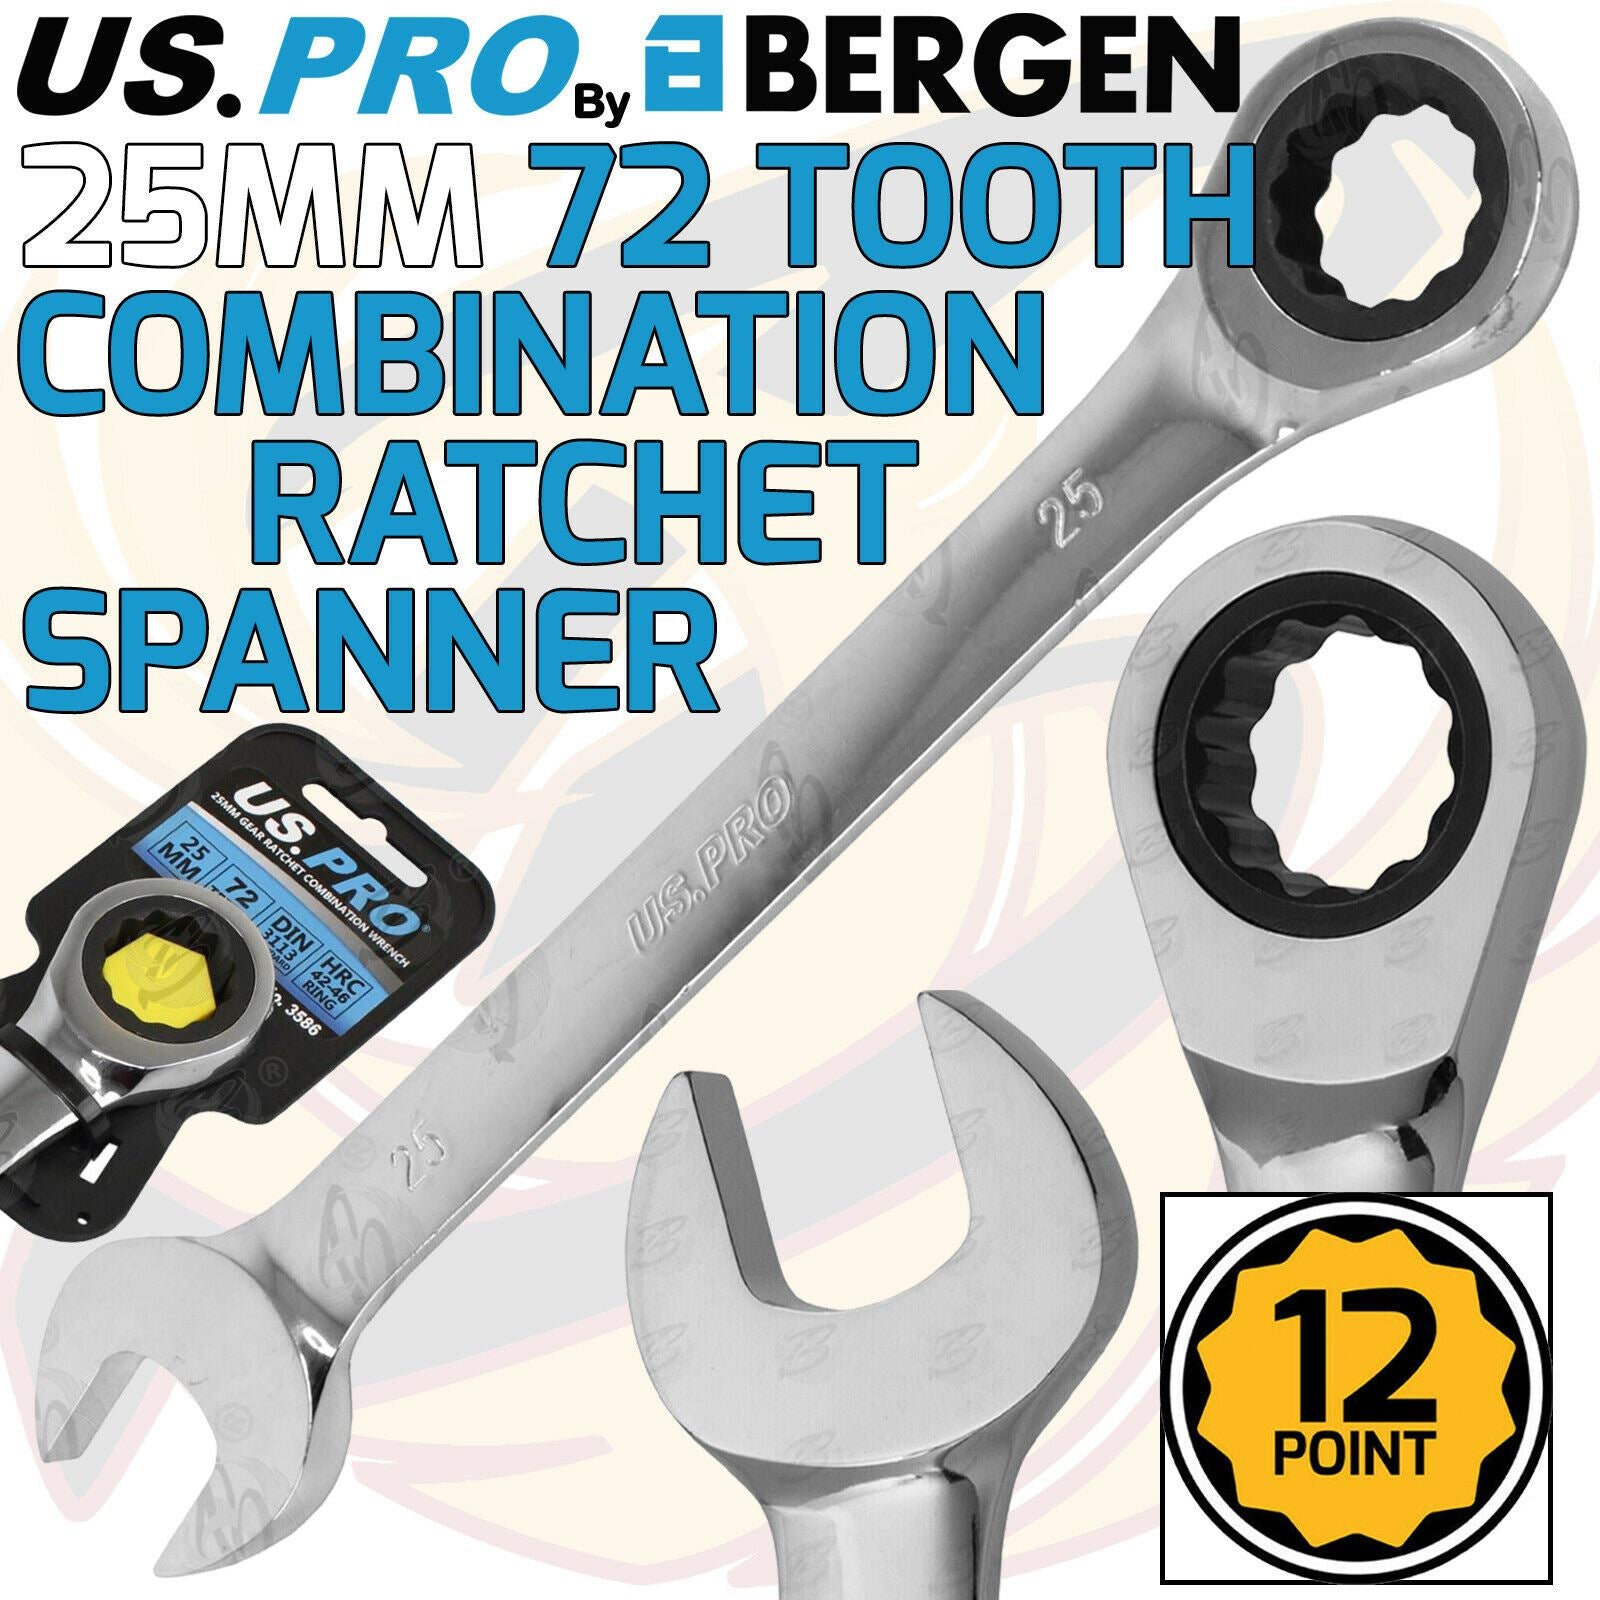 US PRO 25MM 72 TOOTH RATCHET SPANNER